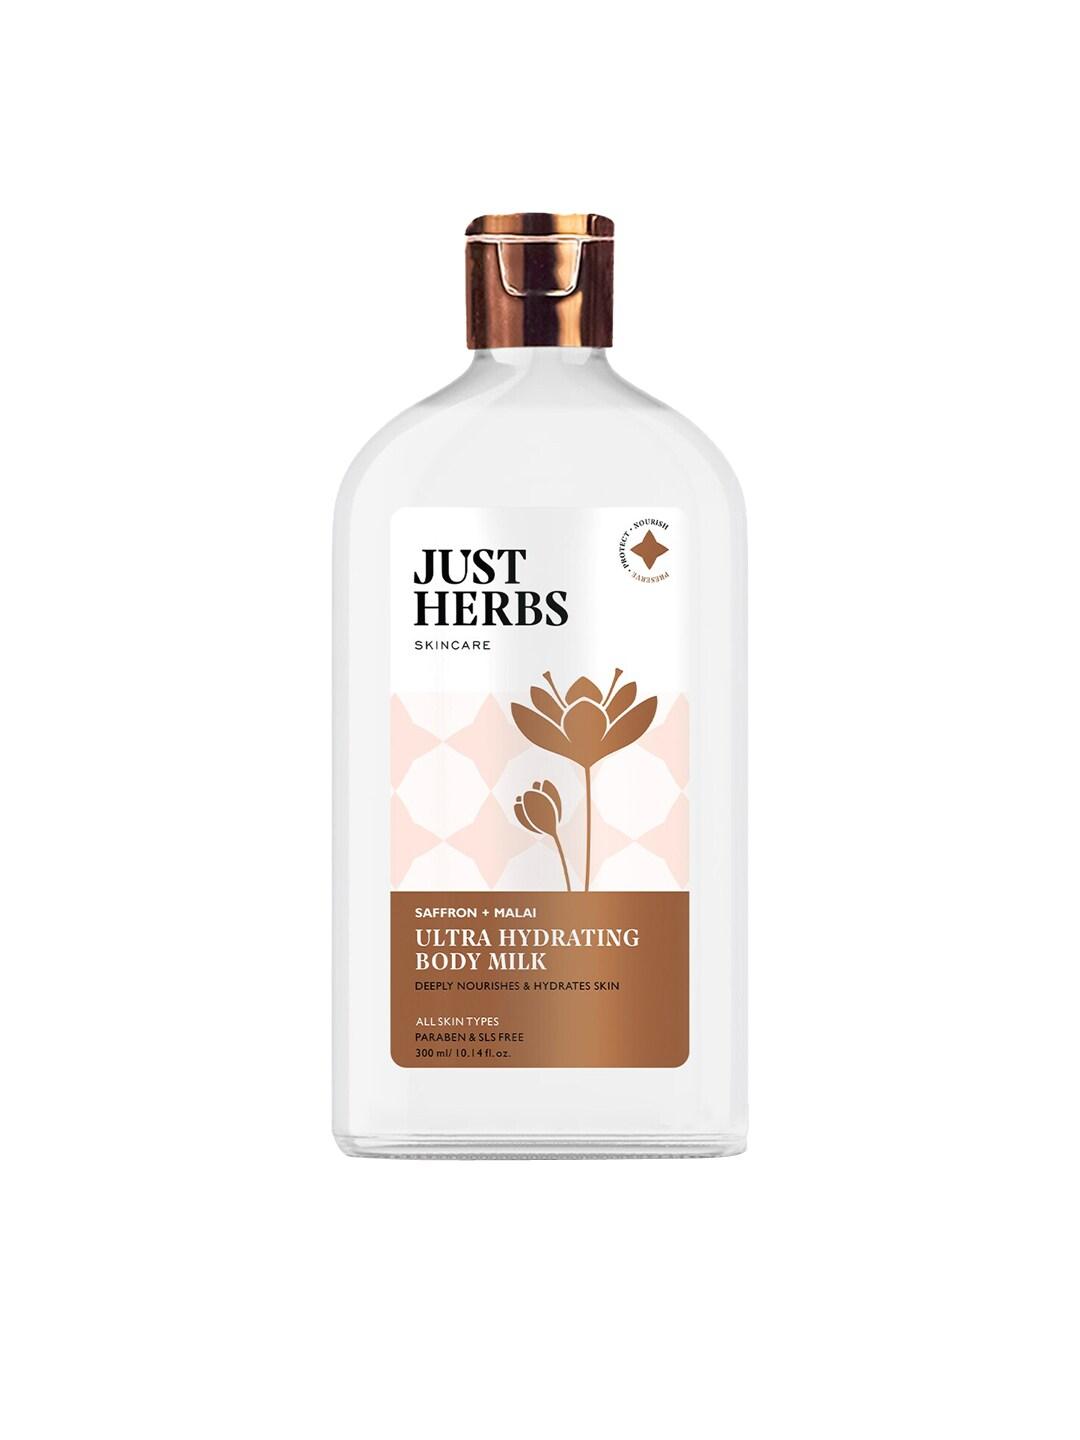 Just Herbs Skincare Ultra Hydrating Body Milk Lotion with Saffron & Malai - 300 ml